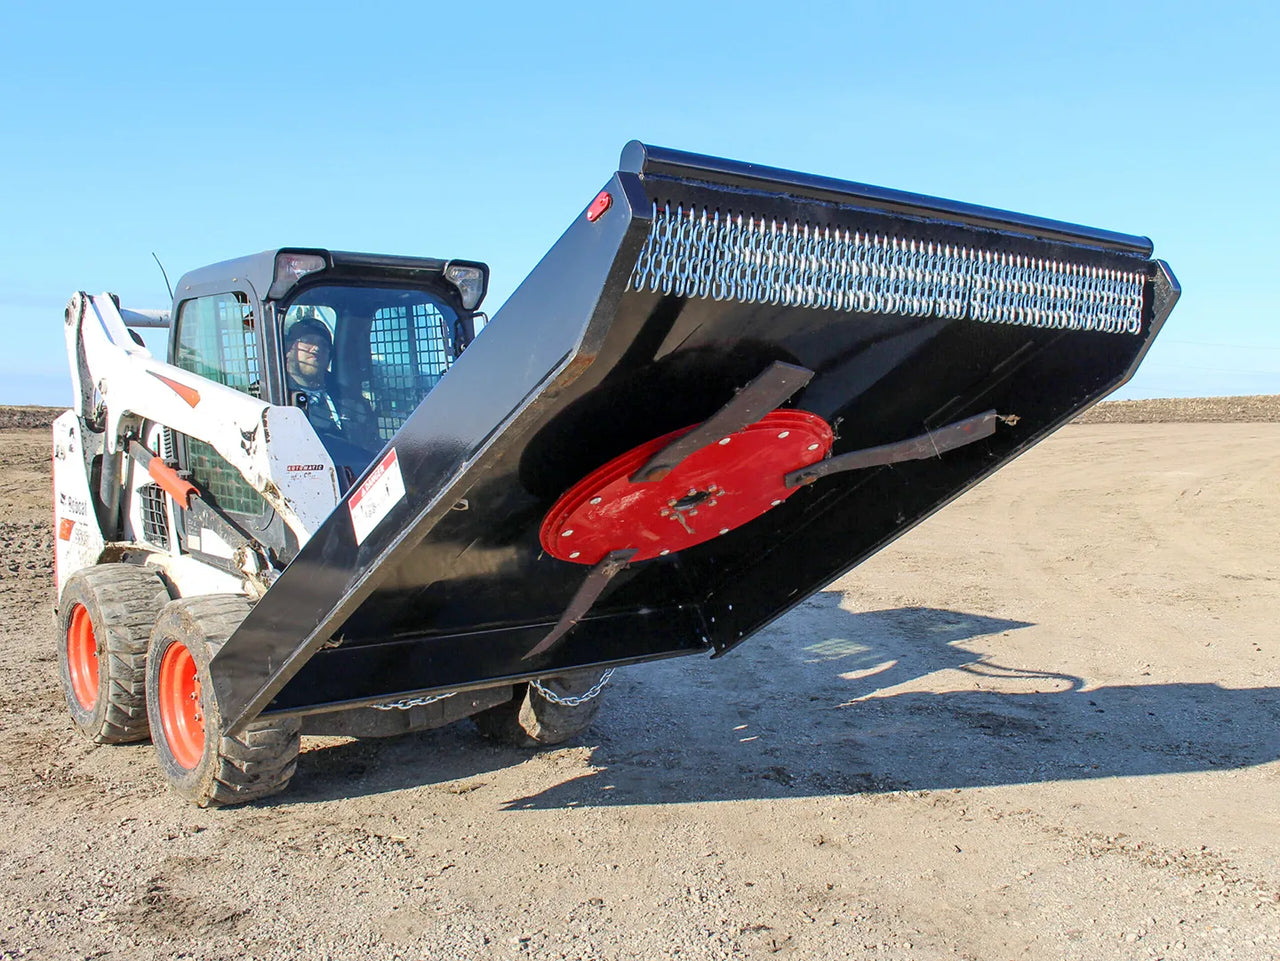 A skid steer equipped with a 72" brush cutter attachment from Messer Attachments. The brush cutter, held aloft, reveals its robust red cutting blades and protective chain guard, showcasing its heavy-duty design for effective land clearing and brush cutting. The skid steer operator is visible inside the cab, demonstrating the equipment's operational setup.